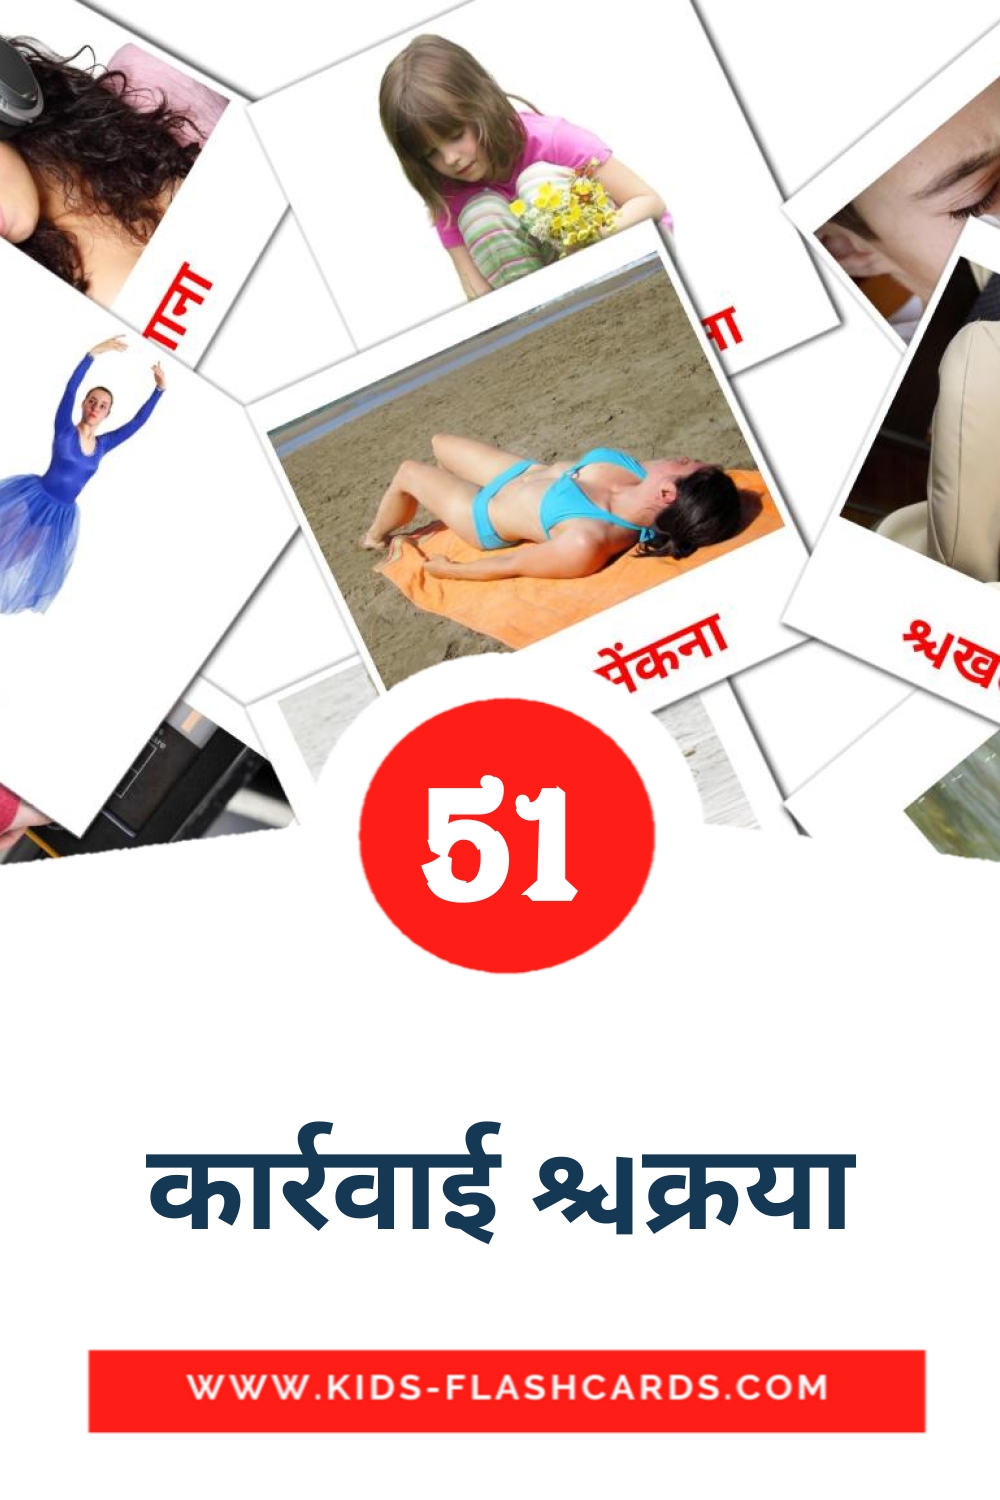 51 कार्रवाई क्रिया Picture Cards for Kindergarden in hindi